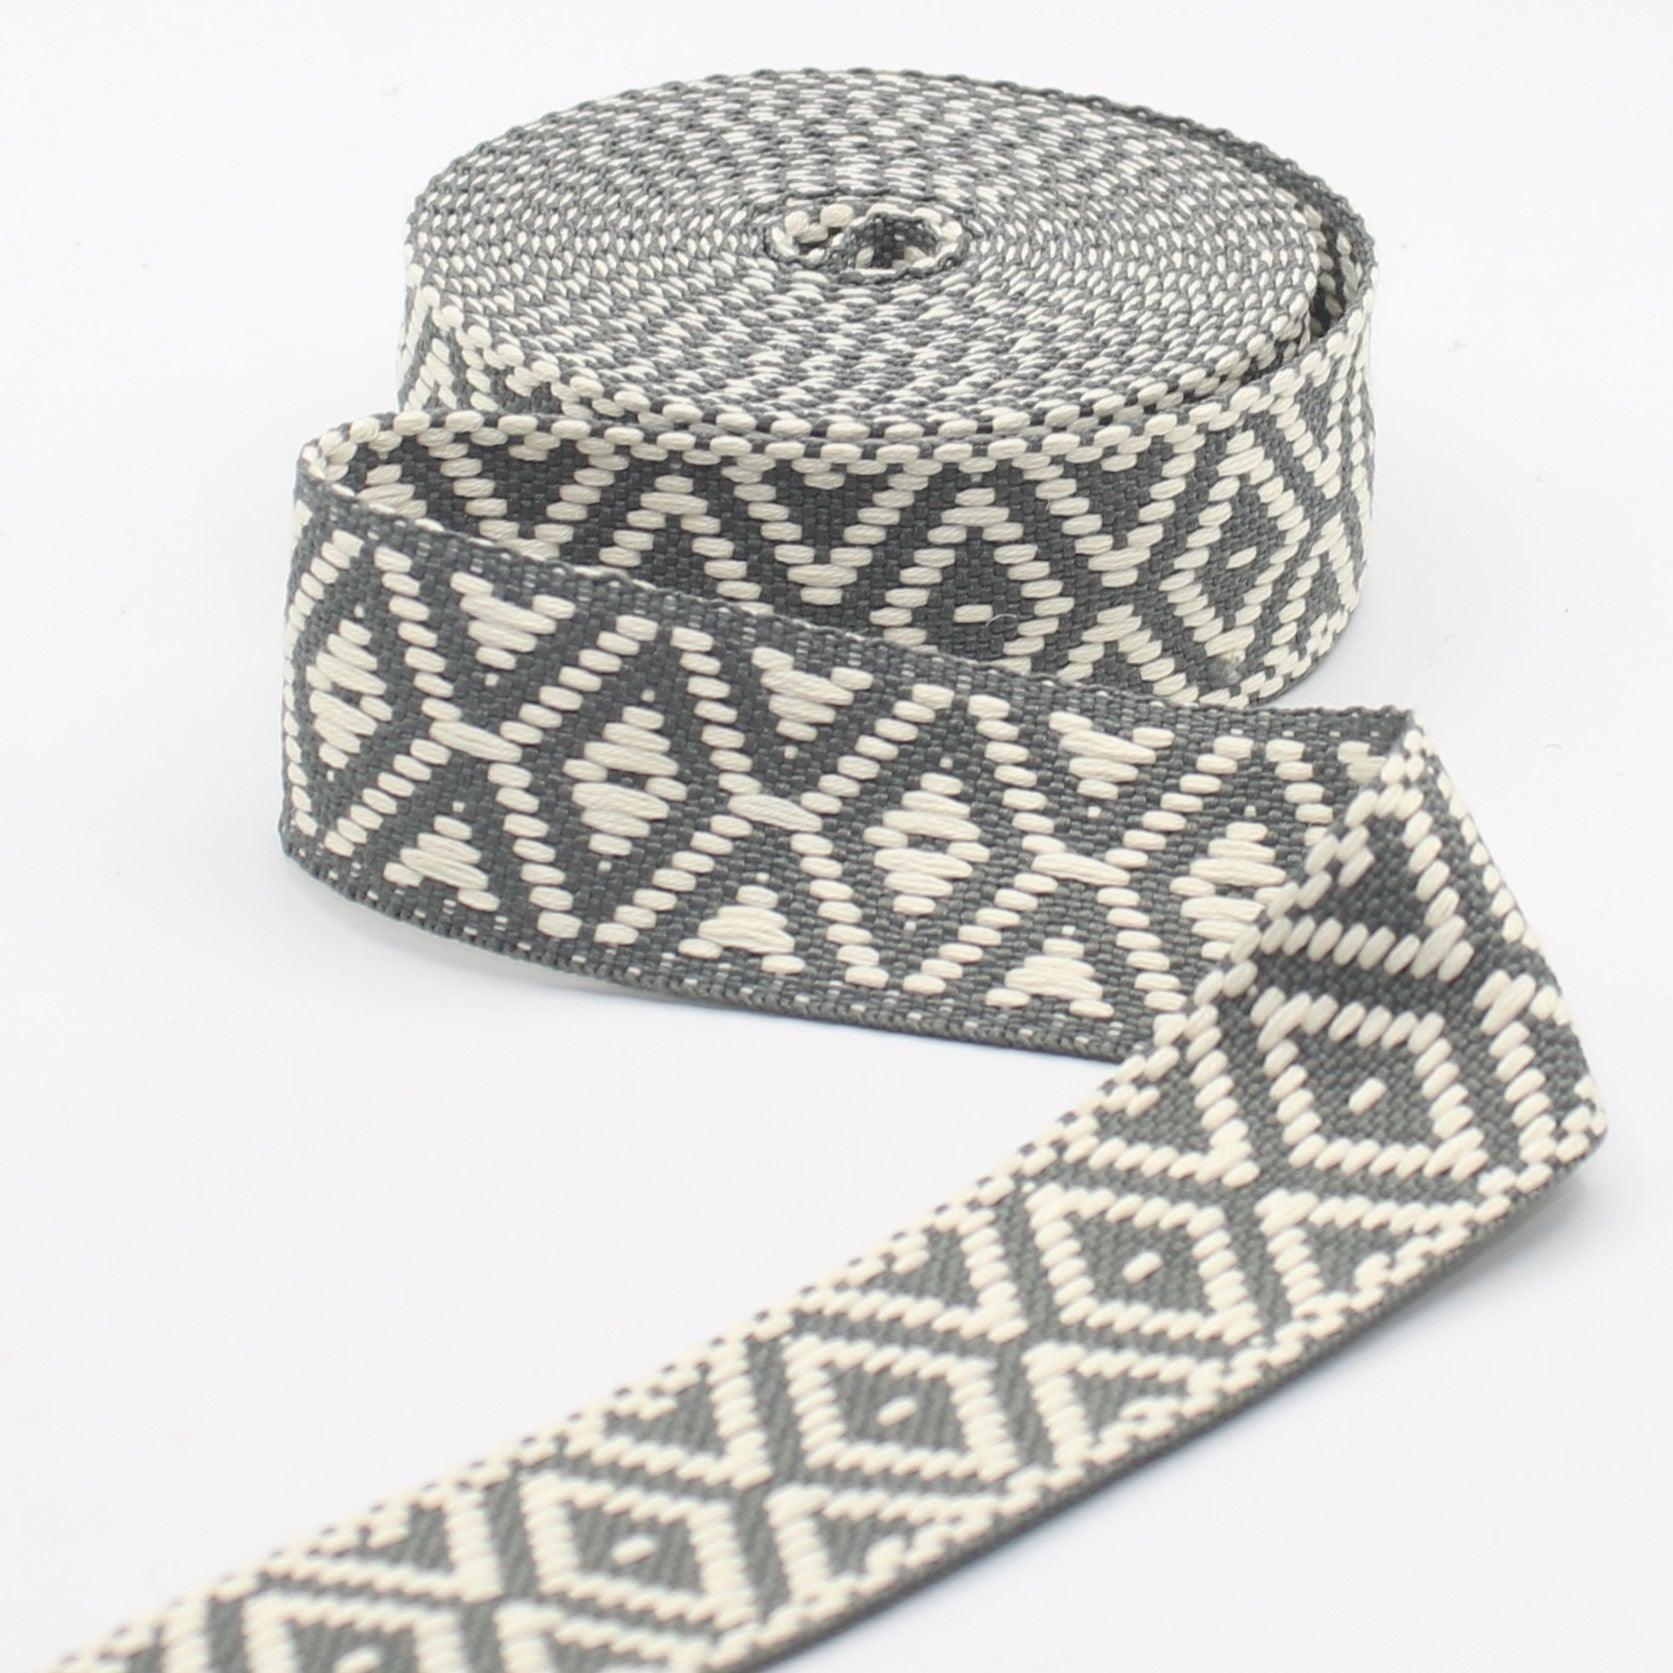 5 meters of Ethnic Strap with diamond-shaped patterns, 40mm #RUB3562 - ACCESSOIRES LEDUC BV